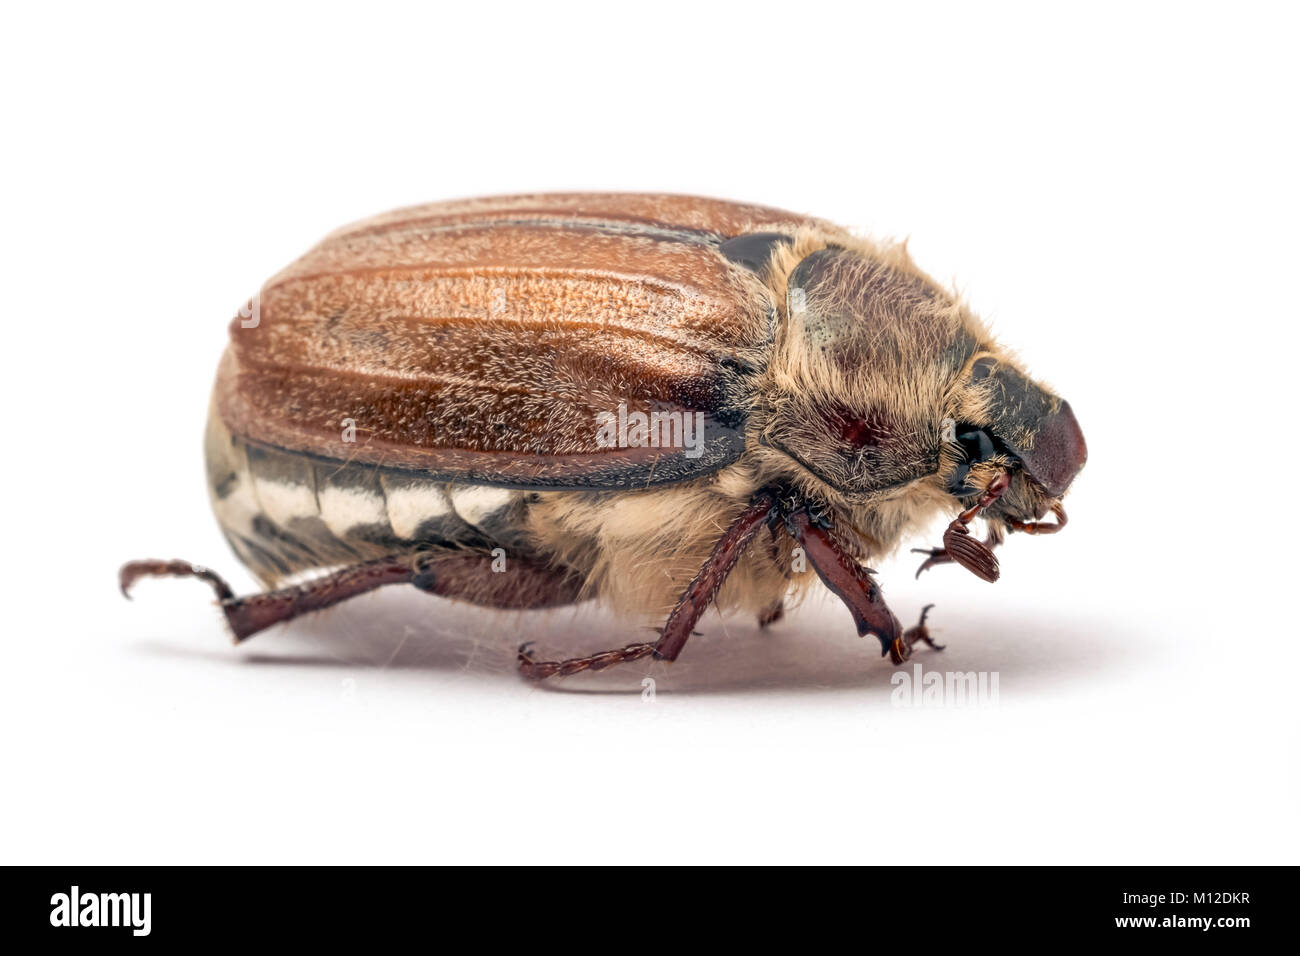 Cockchafer, or may bug, (Melolontha melolontha), macro shot, studio isolated. Stock Photo